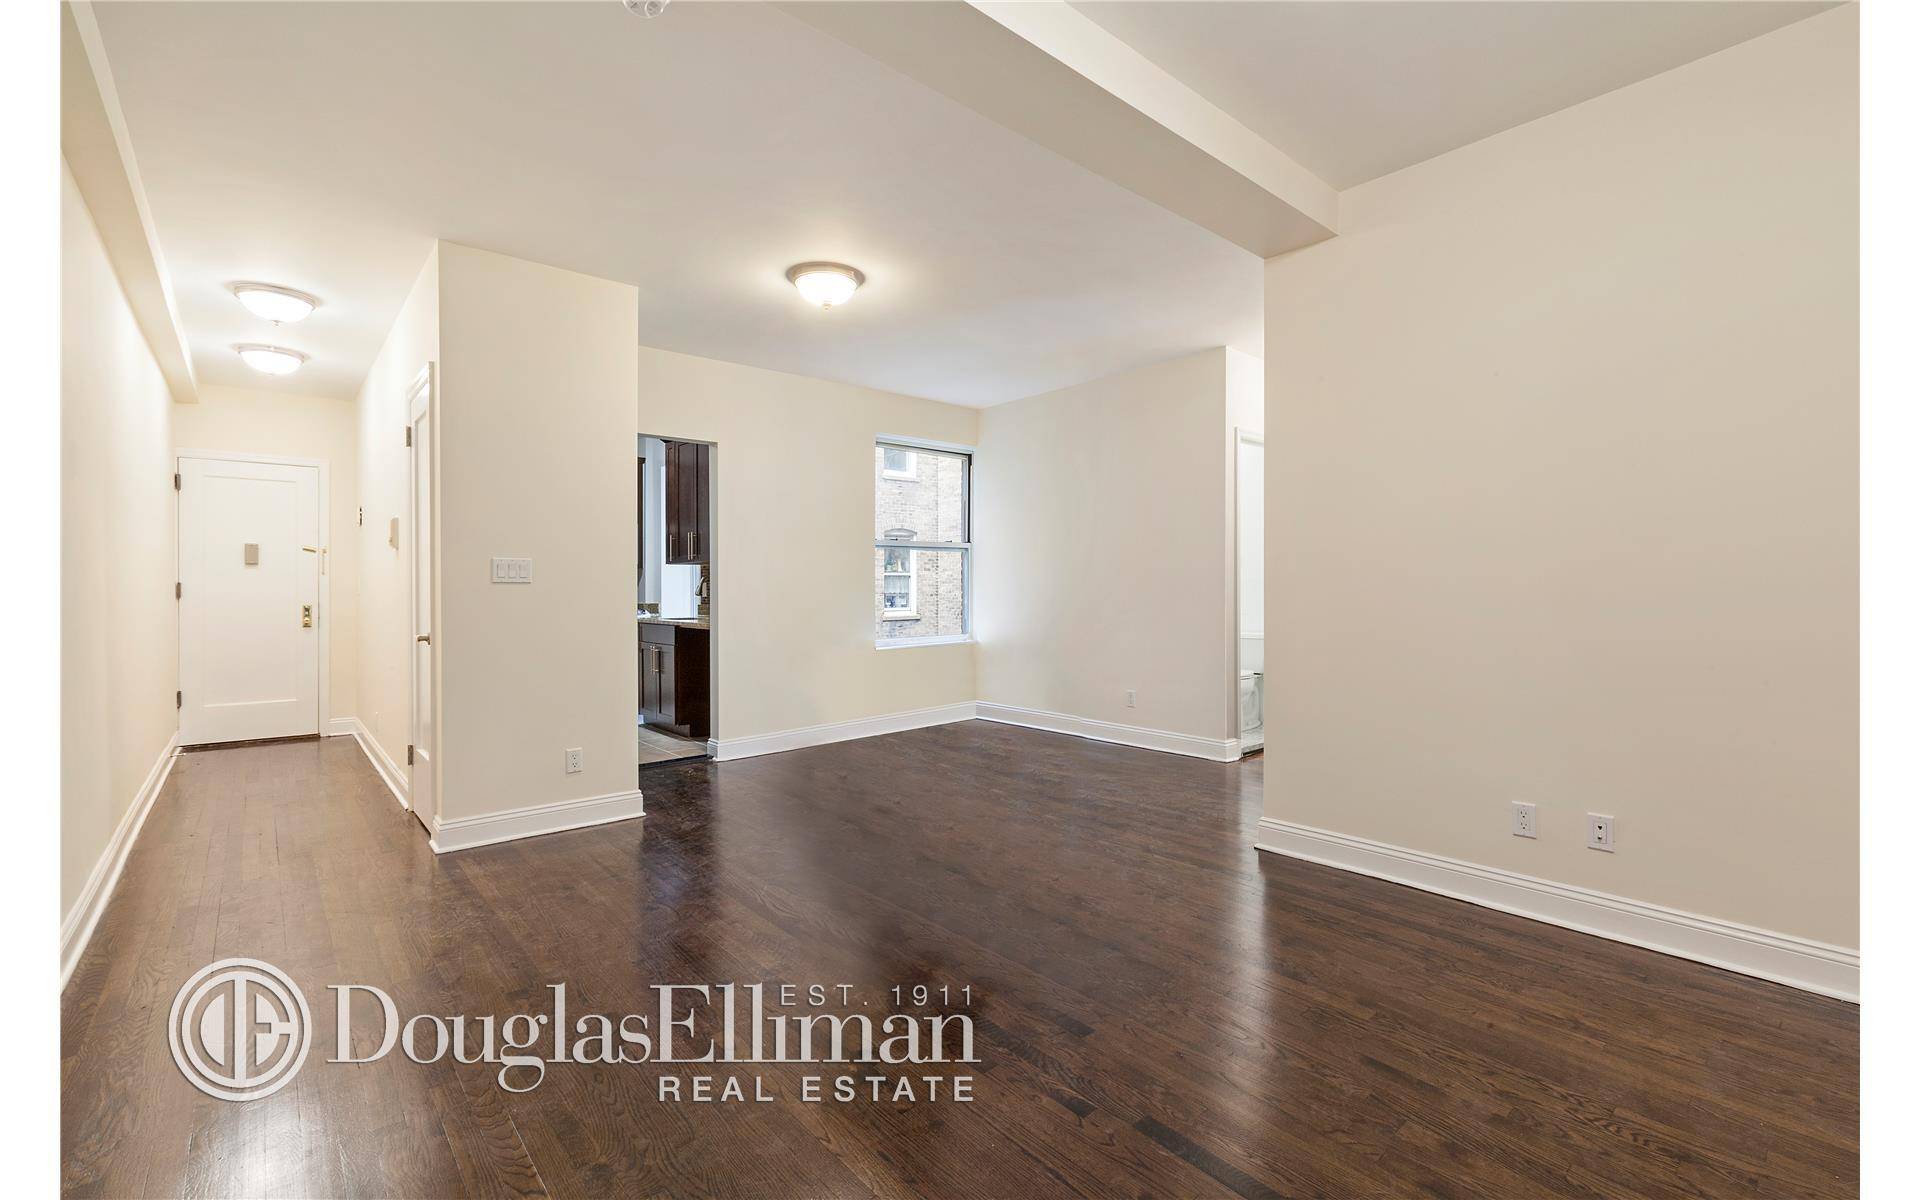 Spacious and beautifully renovated 2 bedroom 1 bathroom apartment.